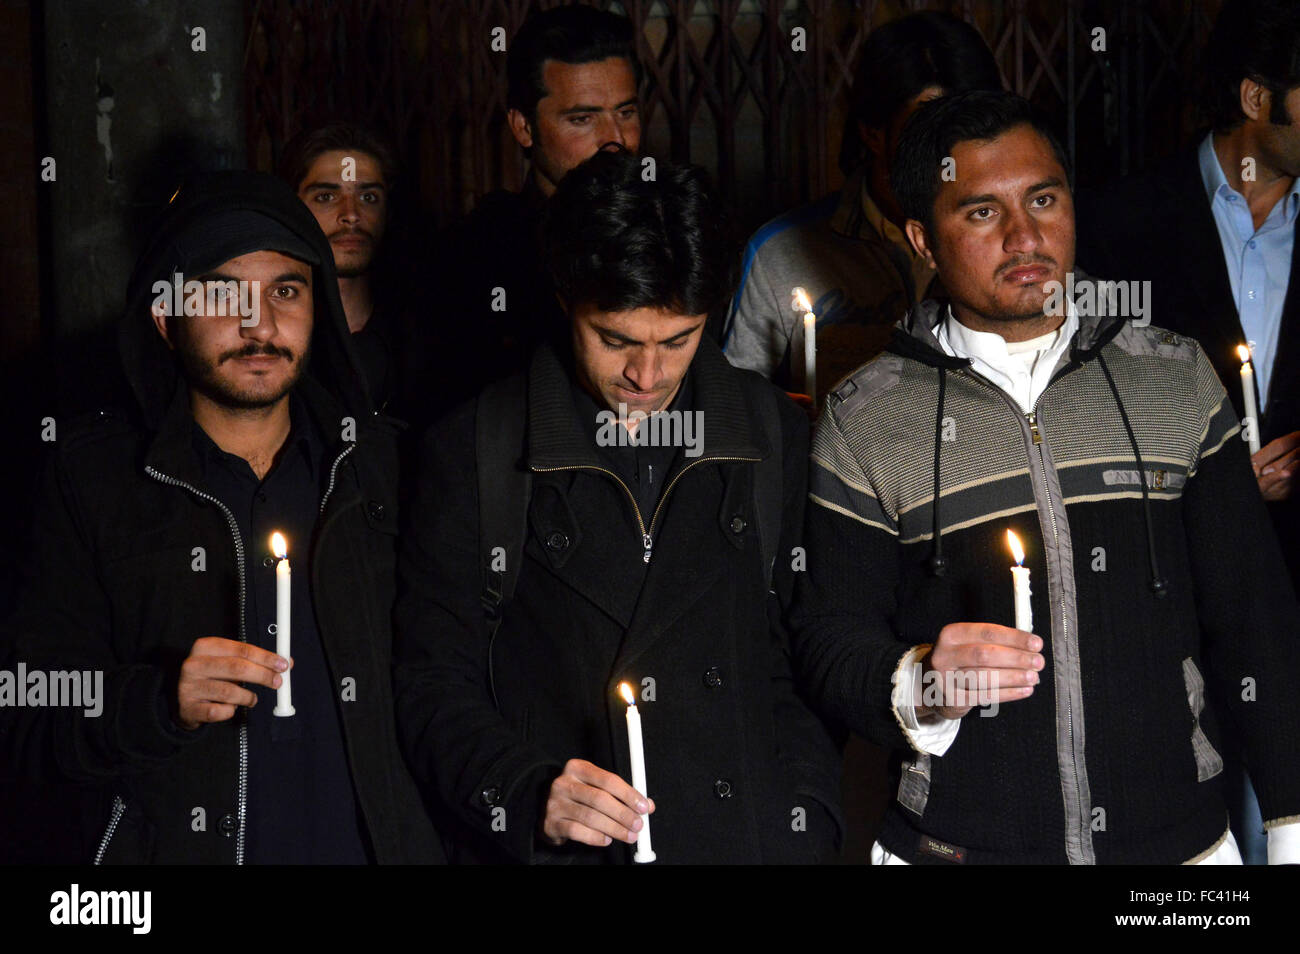 Quetta. 20th Jan, 2016. Pakistani people hold candles during a vigil ceremony mourning victims of an attack in Bacha Khan University in southwest Pakistan's Quetta on Jan. 20, 2016. At least 22 people were killed and over 40 others injured when an unknown number of gunmen stormed a university in Charsadda district of Pakistan's northwest province of Khyber Pakhtunkhwa on Wednesday morning, local media reported. Credit:  Irfan/Xinhua/Alamy Live News Stock Photo